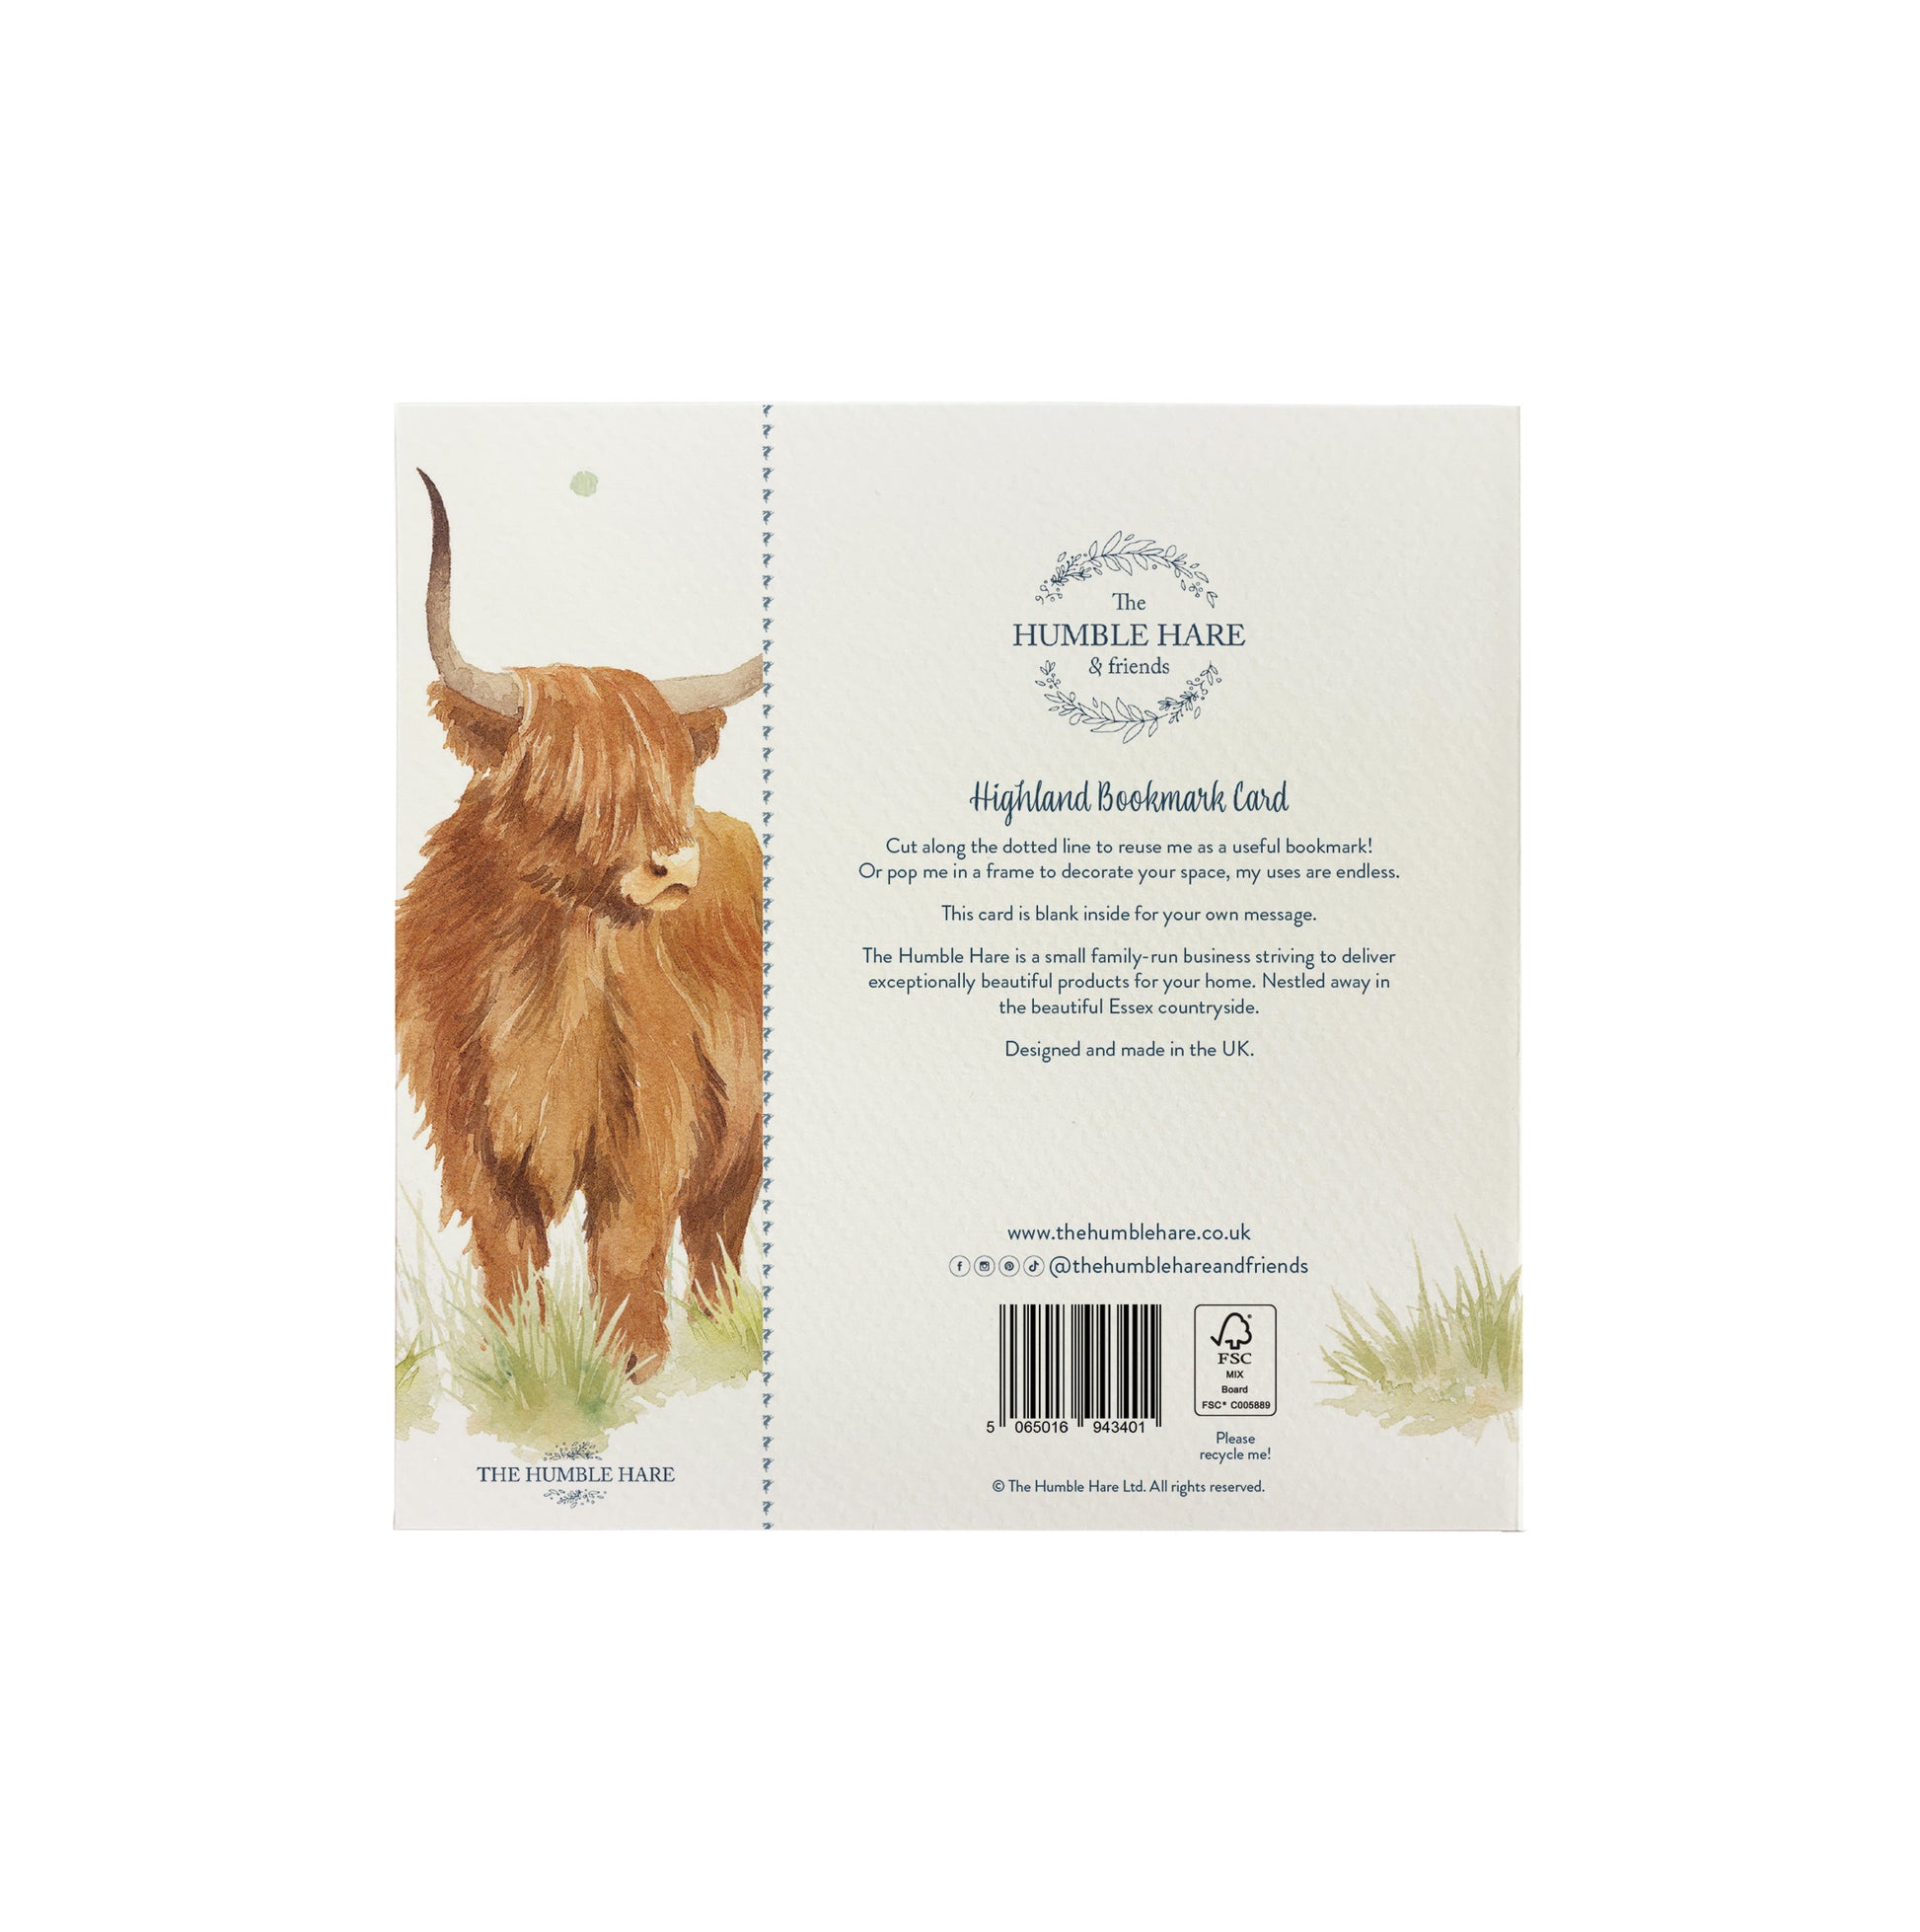 The back of a bookmark greetings card featuring a highland cow in a watercolour style. The back of the card shows The Humble Hare logo and that the card is FSC certified.